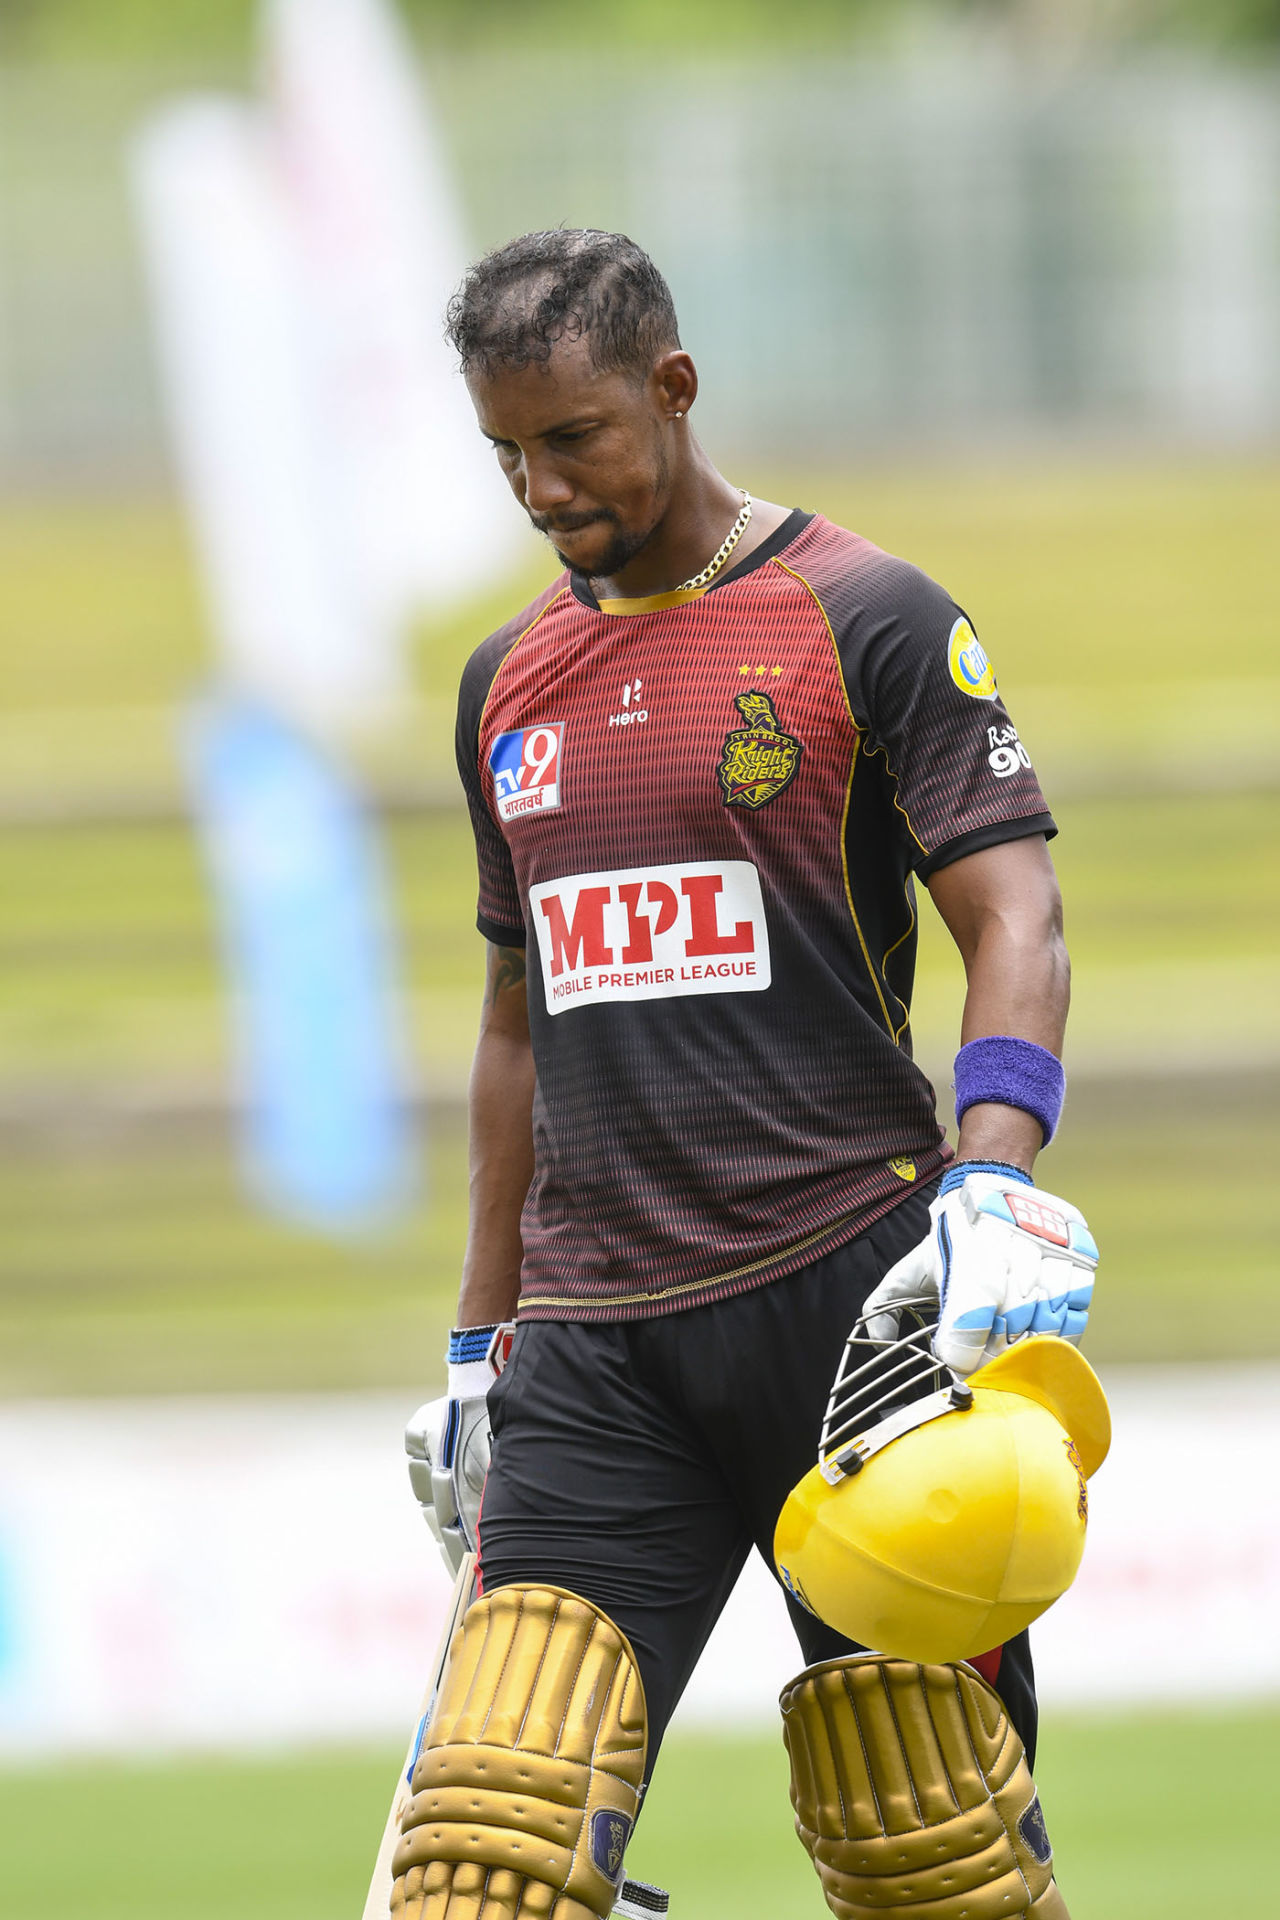 Lendl Simmons trudges off after falling four runs short of a second T20 century, Trinbago Knight Riders v St Kitts and Nevis Patriots, CPL 2020, Tarouba